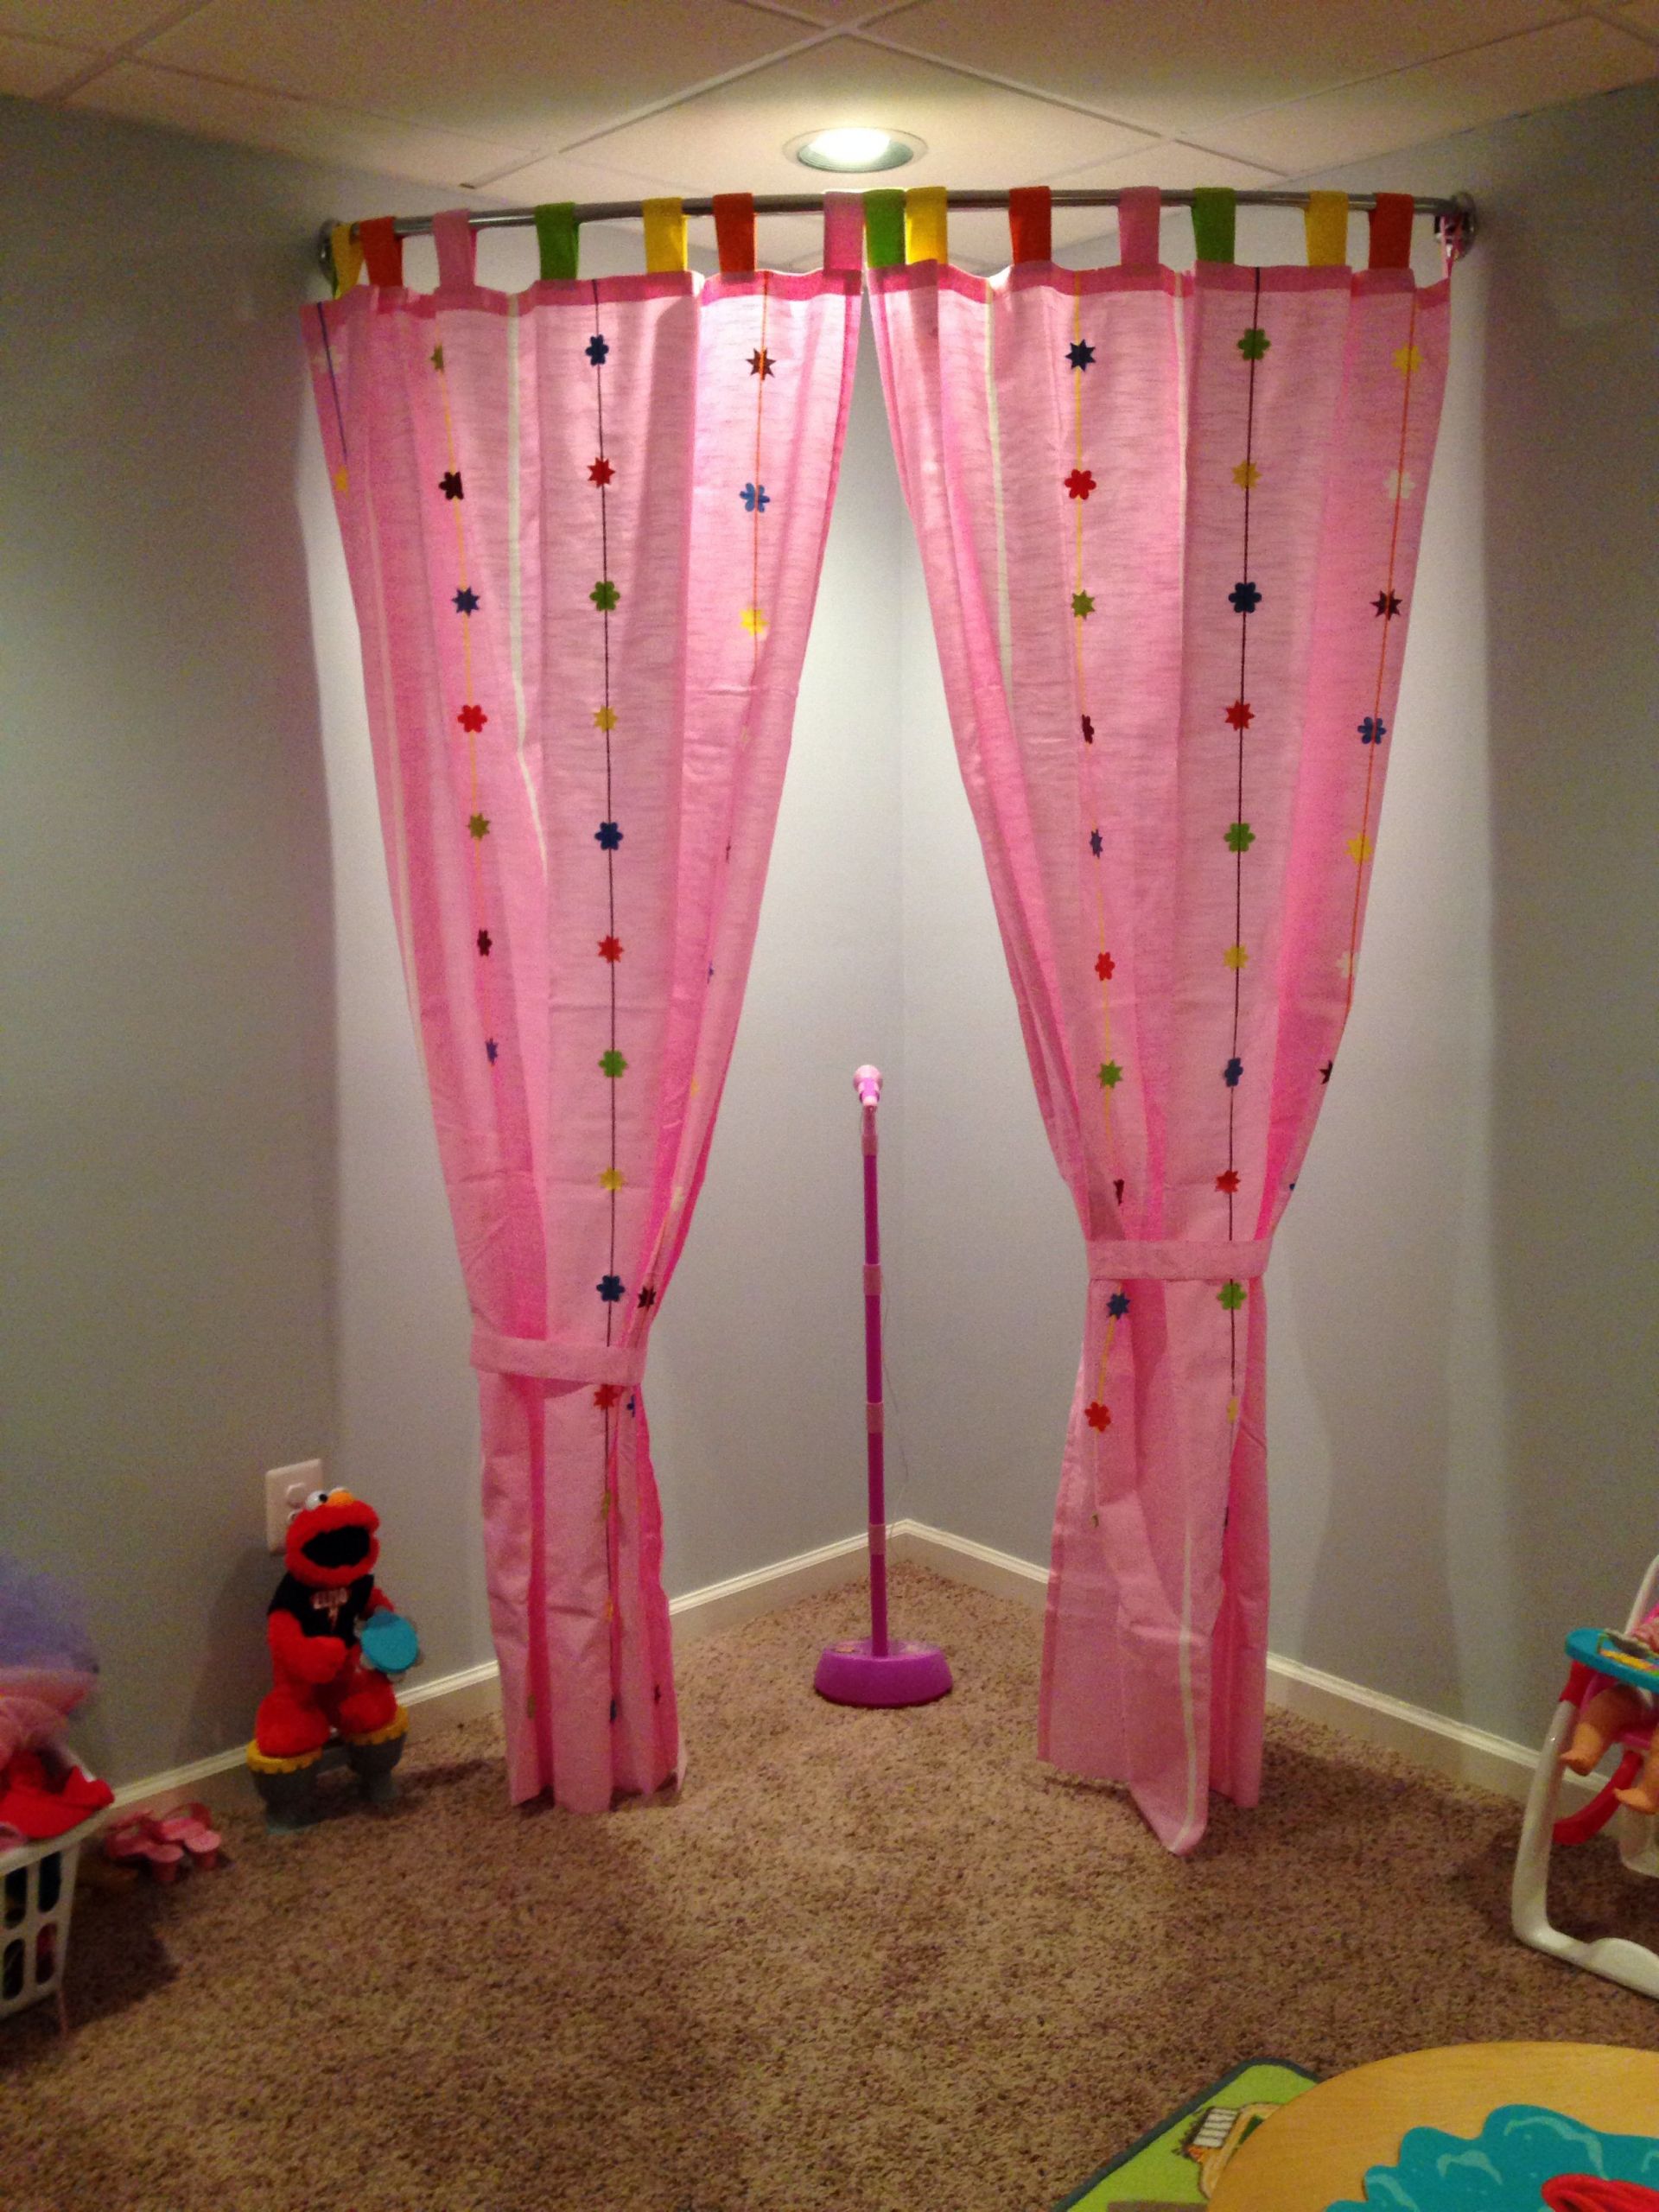 Curtain Rods For Kids Room
 Here s a playroom stage idea I used a curved shower